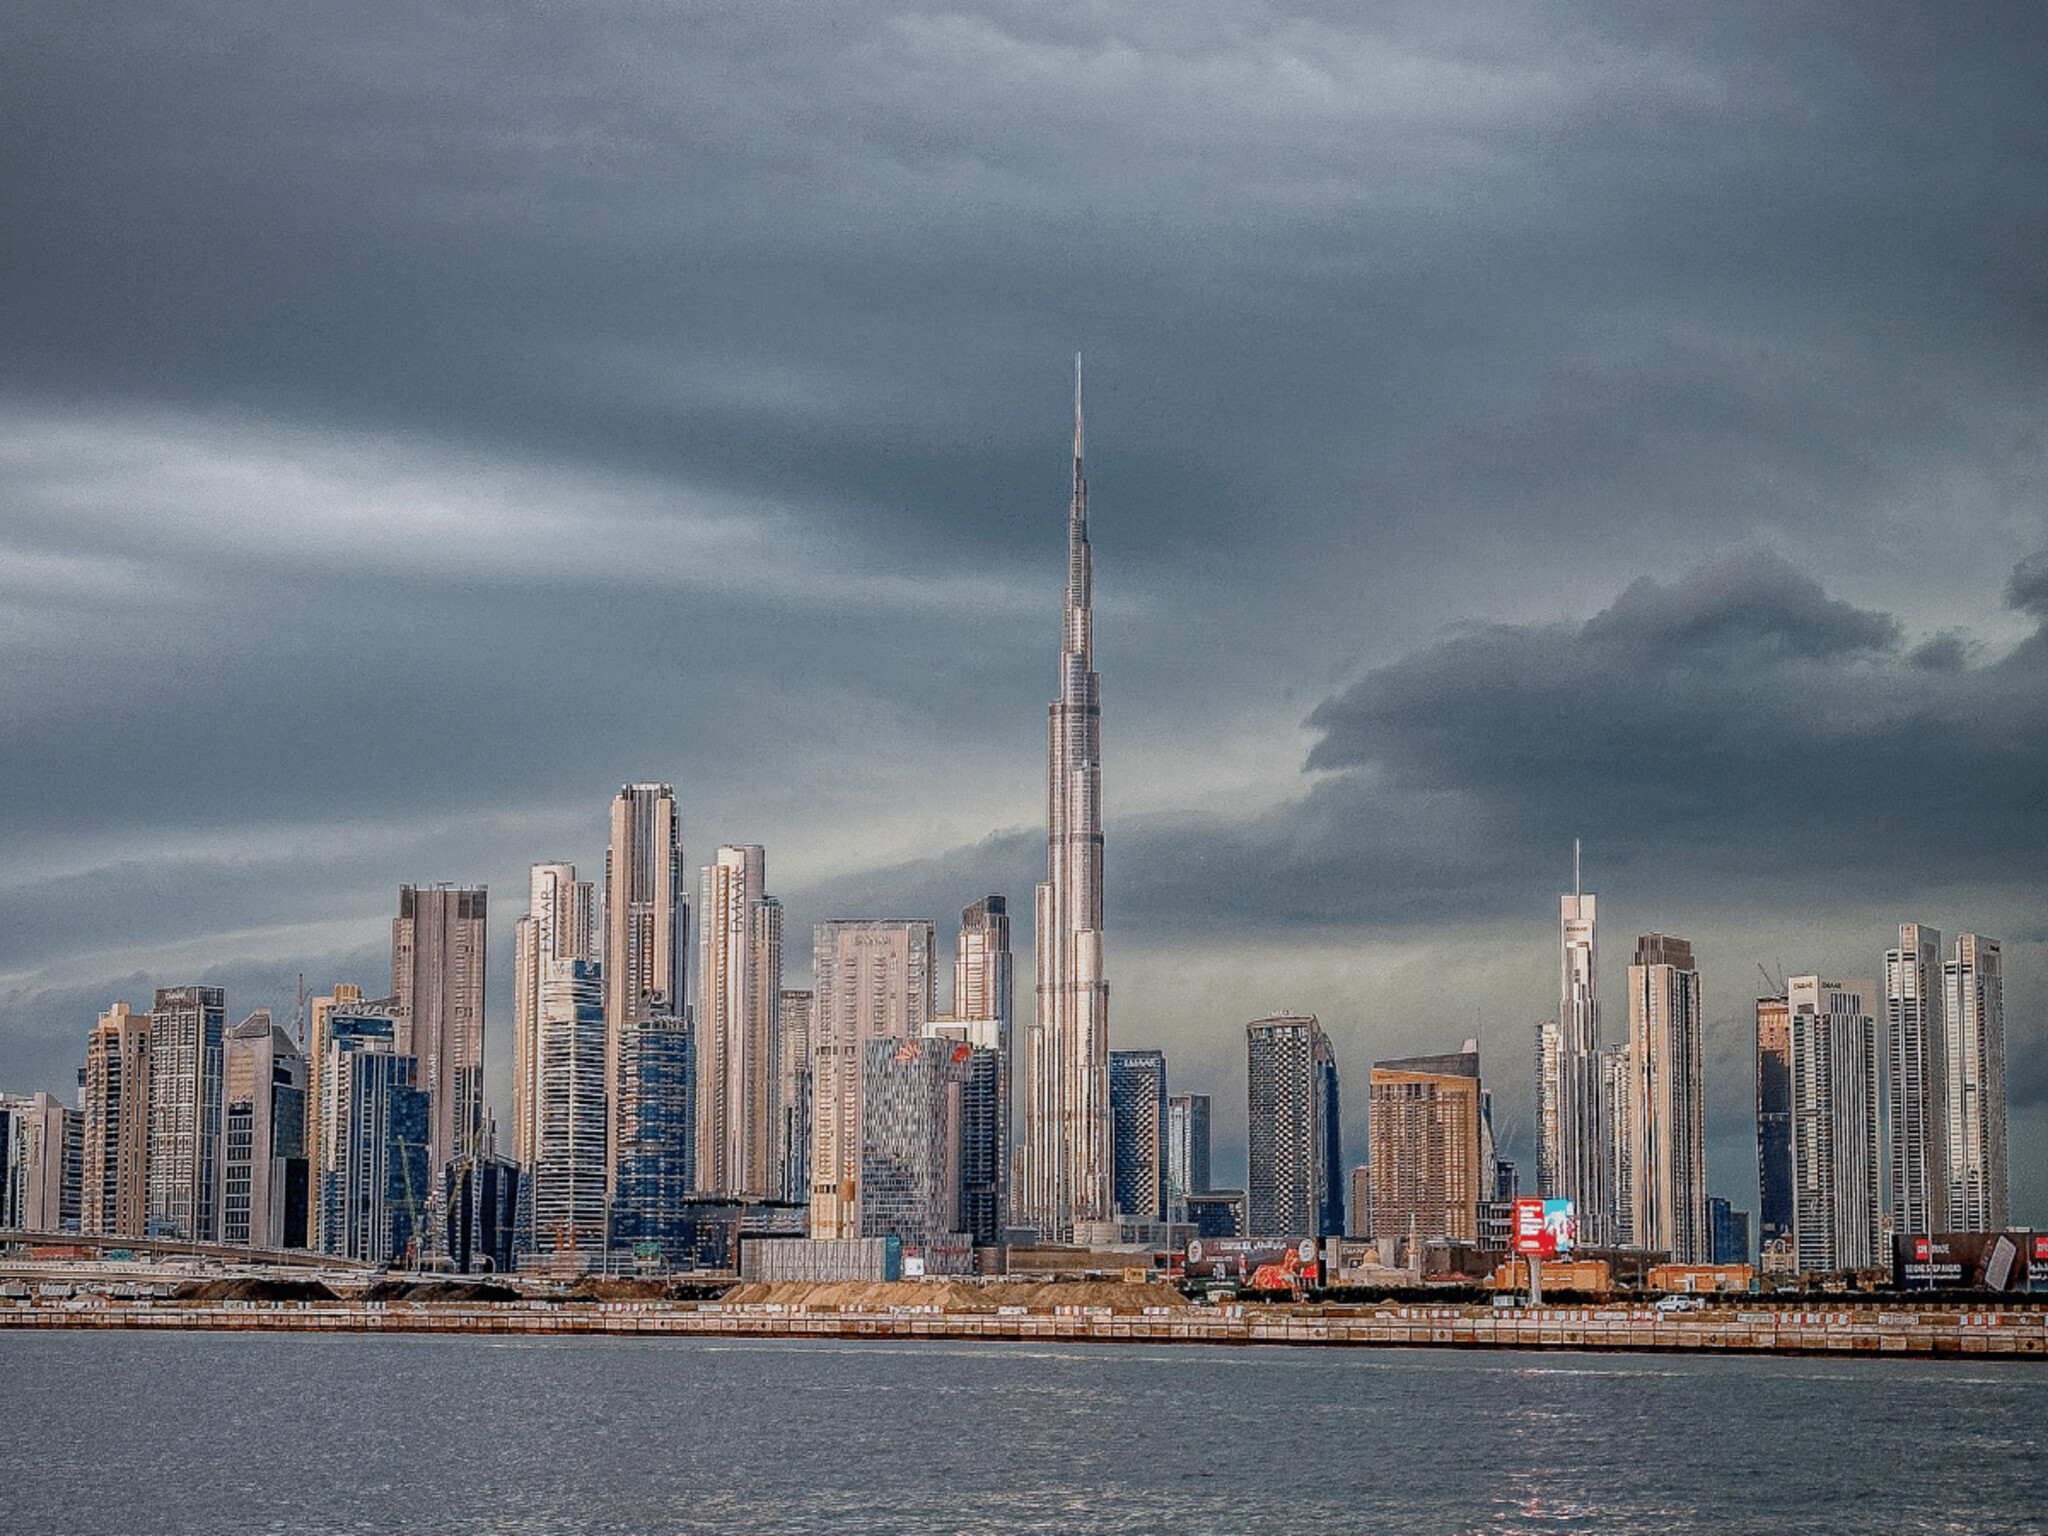 Today's weather: Rain will fall in the Emirates within hours